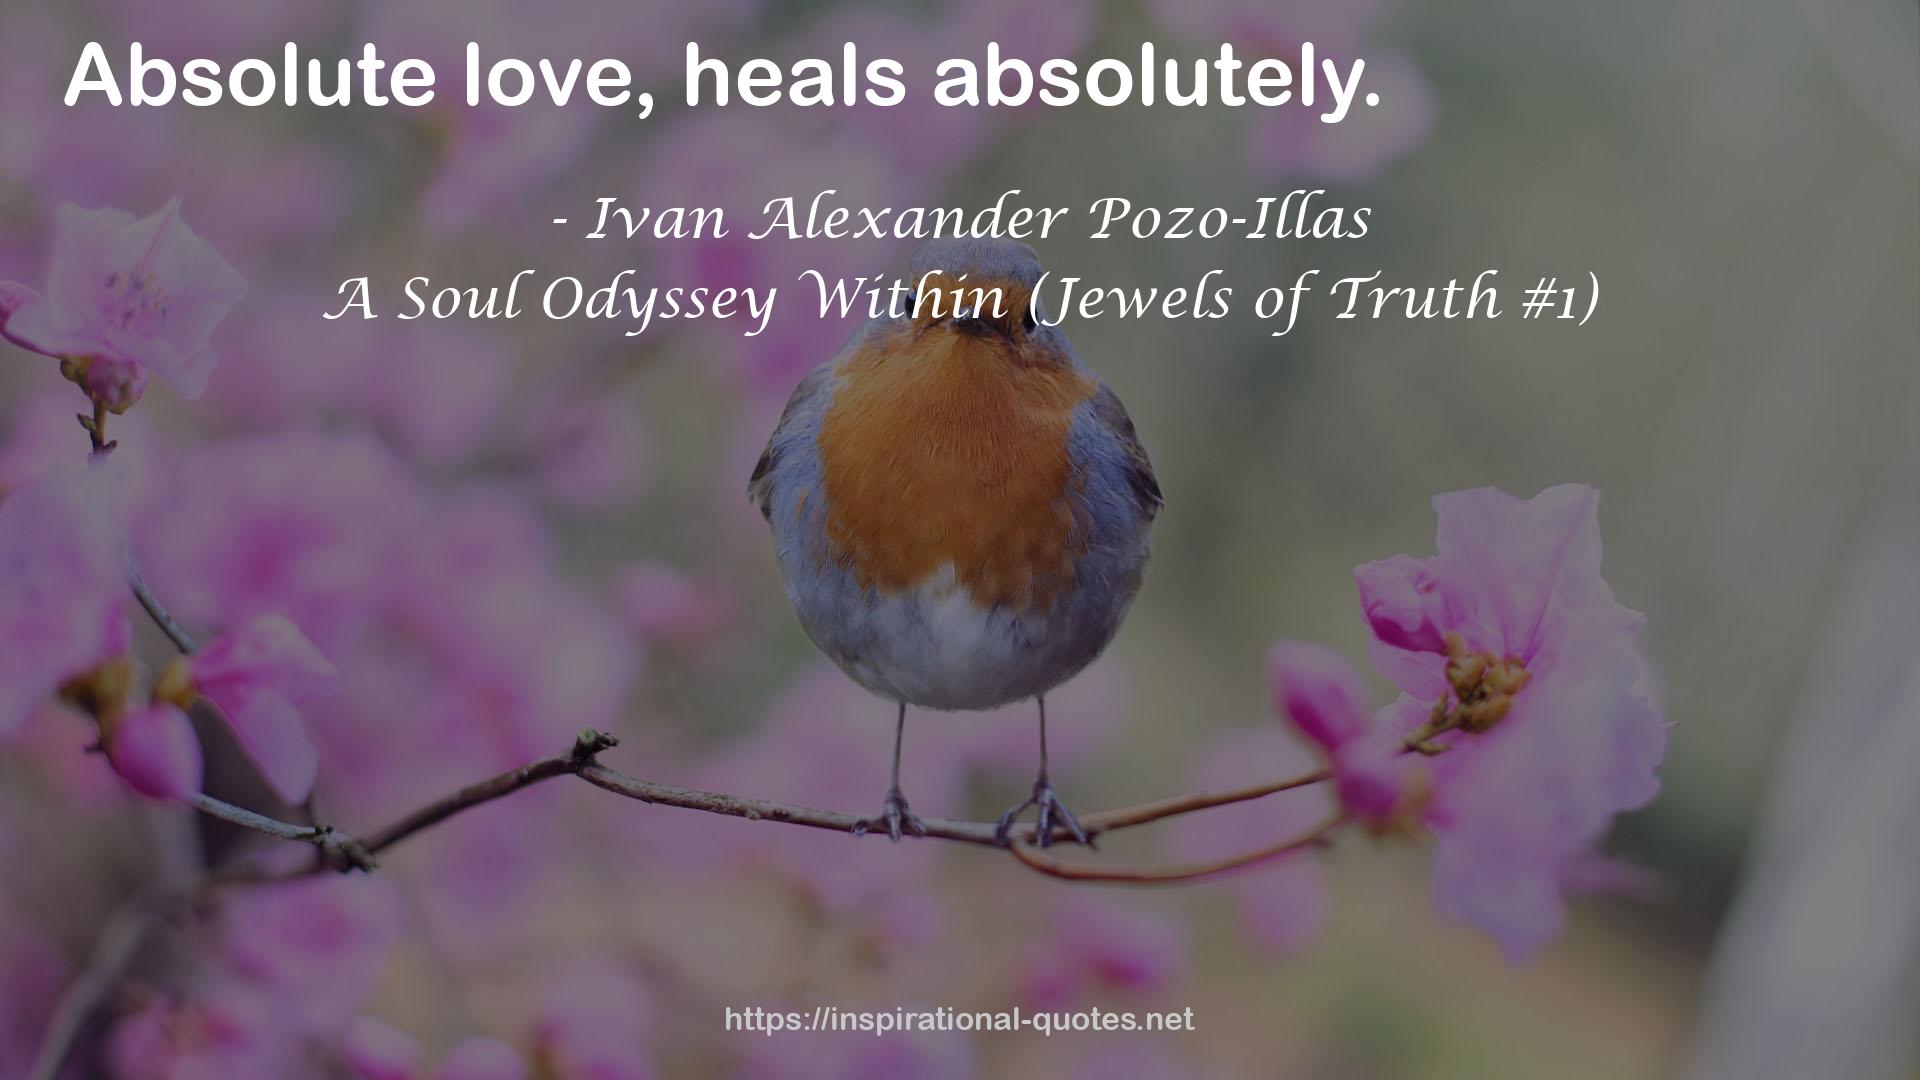 A Soul Odyssey Within (Jewels of Truth #1) QUOTES